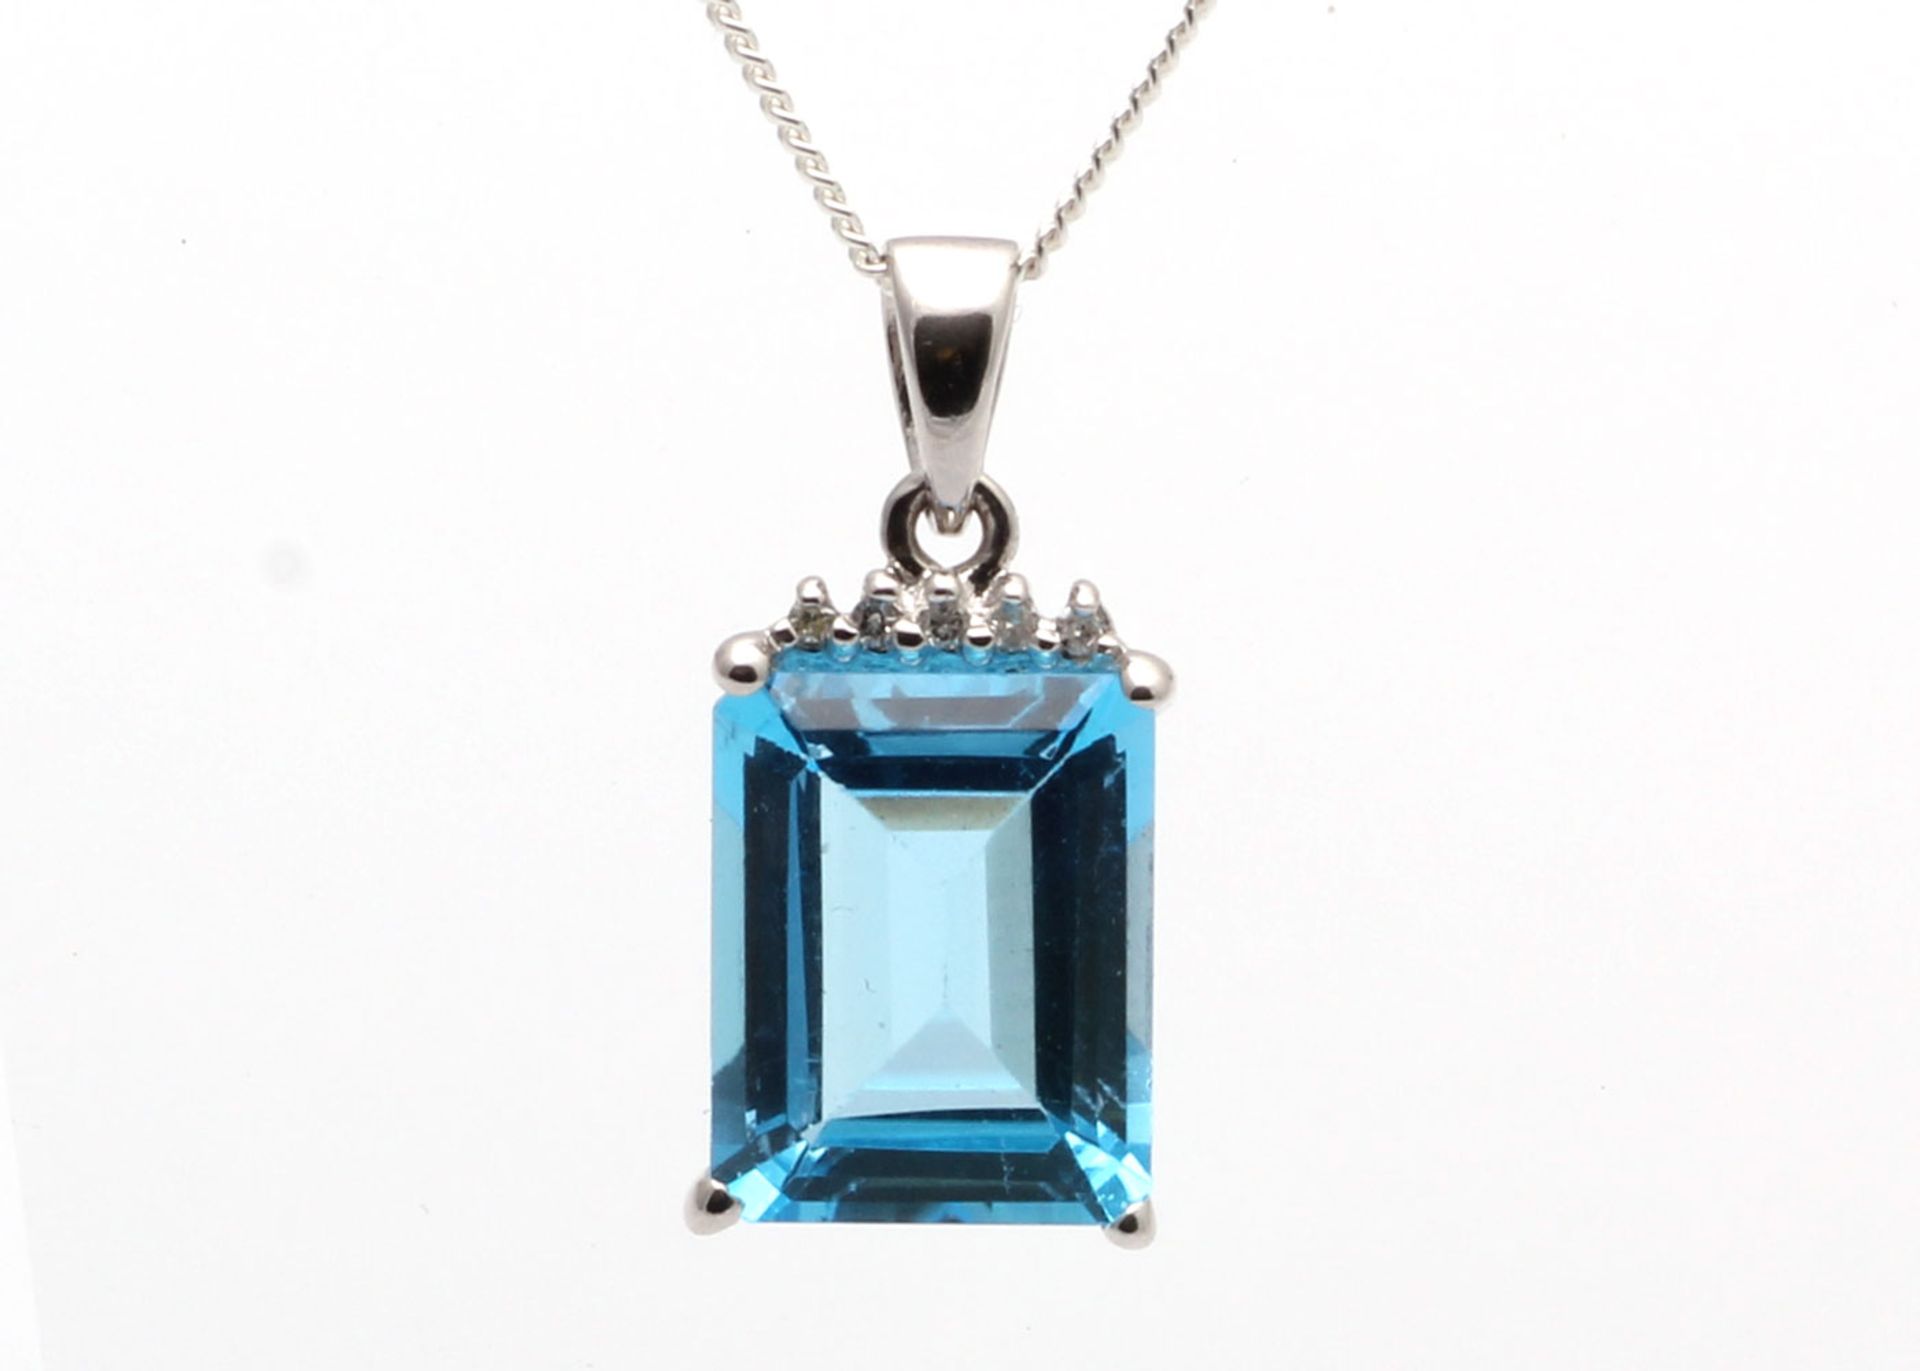 9ct White Gold Diamond And Blue Topaz Pendant 0.01 Carats - Valued by GIE £899.00 - 9ct White Gold